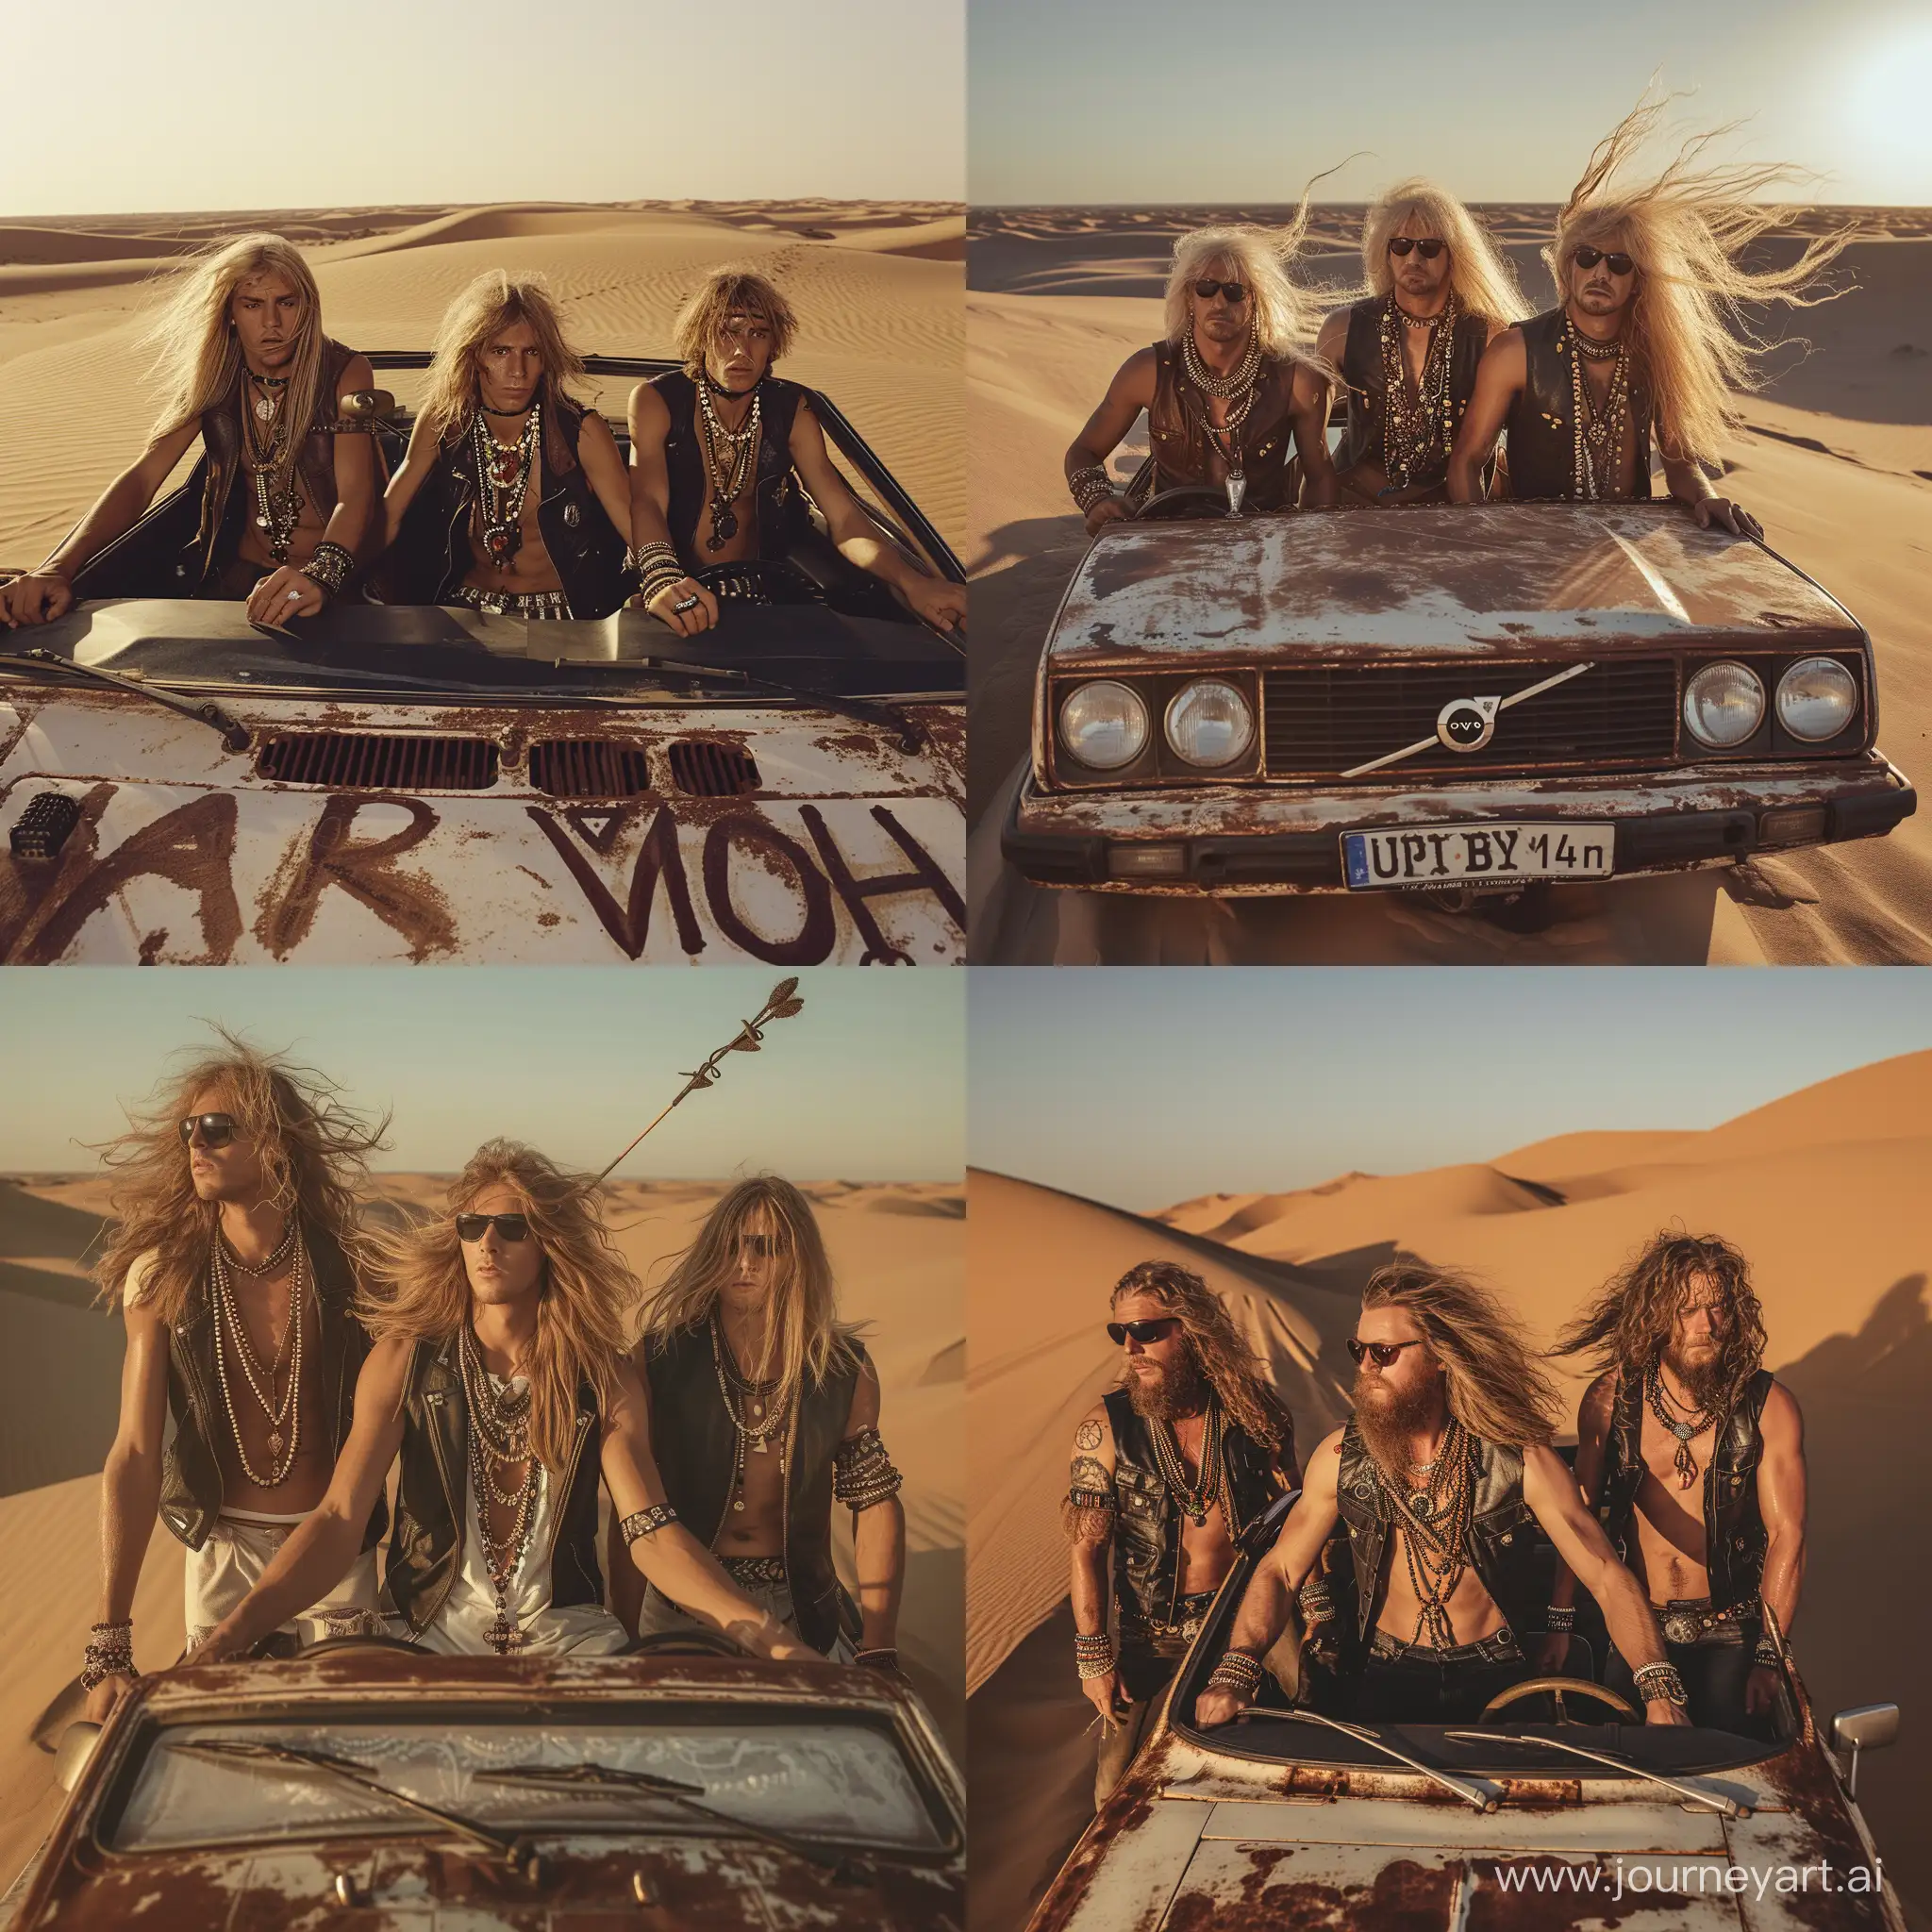 A photograph of three white hippies with long, unkempt hair, wearing leather vests and beaded jewelry, looking rugged, navigating a rusty Volvo 144 through Sahara dunes at dawn. Early morning light, long shadows, untouched sand. Created Using: rugged look, early dawn lighting, rustic car appearance, untouched sand dunes, shadow play, earthy tones, natural desert beauty, vintage feel 